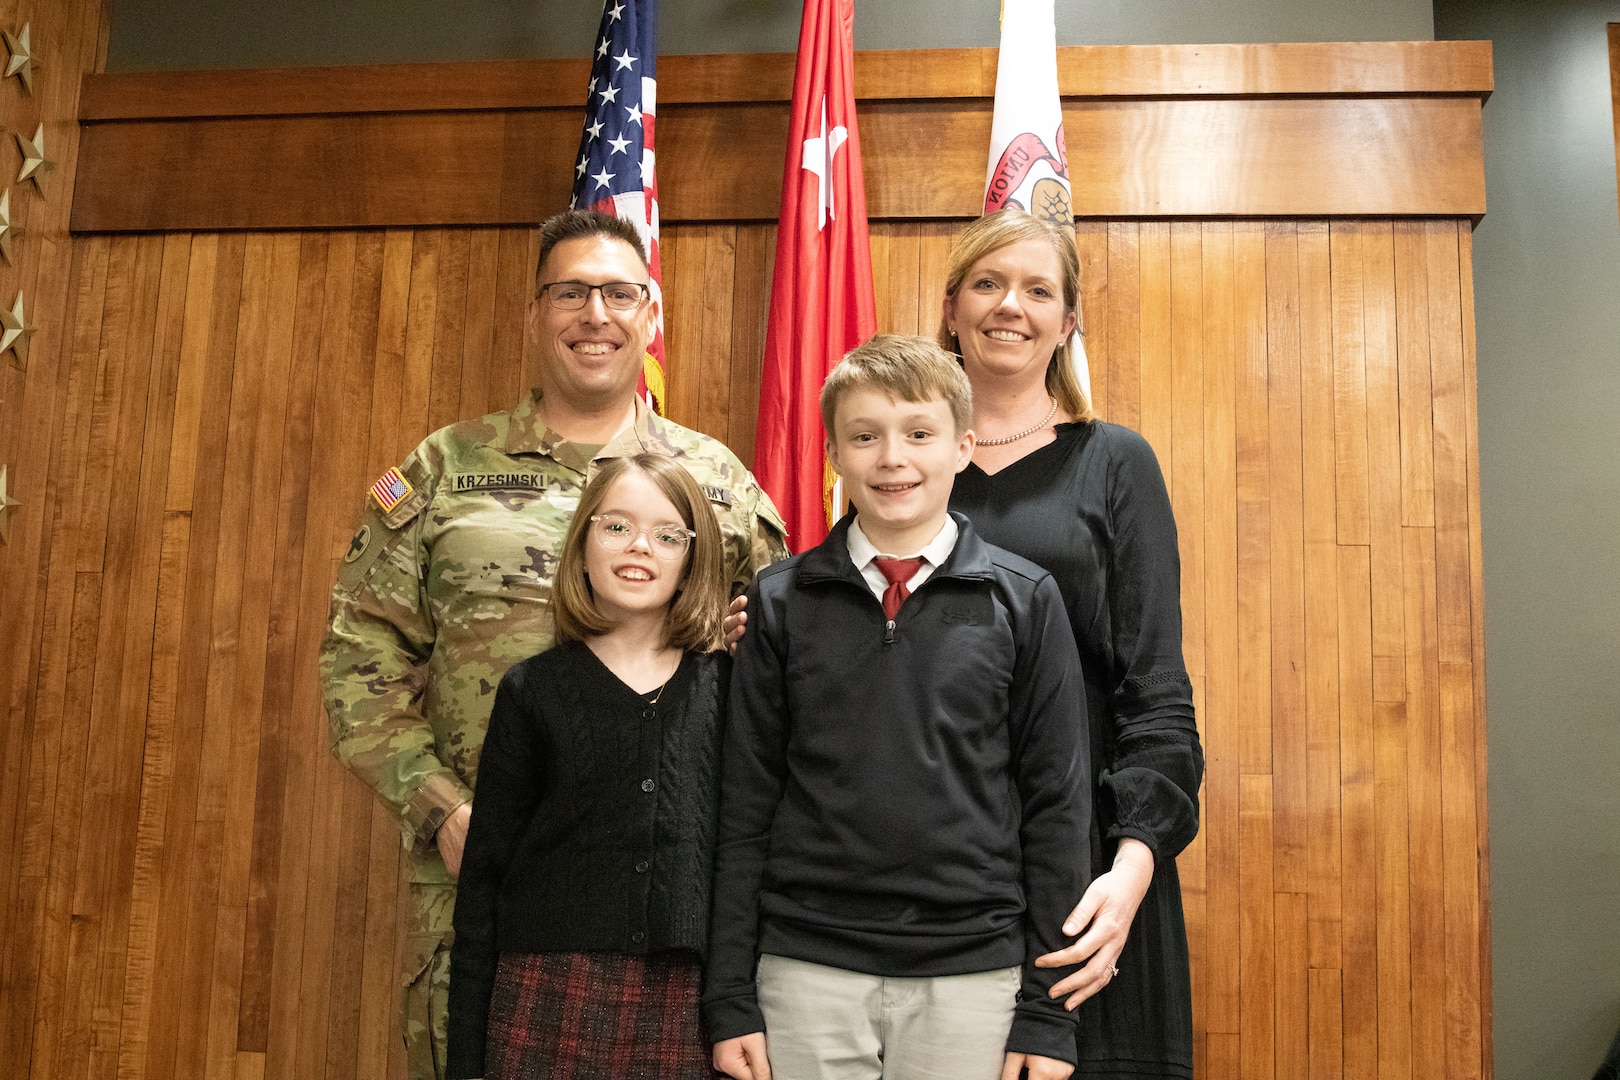 Lt. Col. Nicholas Krzensinki, staff officer in the Illinois Army National Guard Headquarters’ Plans, Operations, and Training Directorate (G3) poses with his family after his promotion ceremony at the Illinois Military Academy on Camp Lincoln in Springfield on Jan. 4.